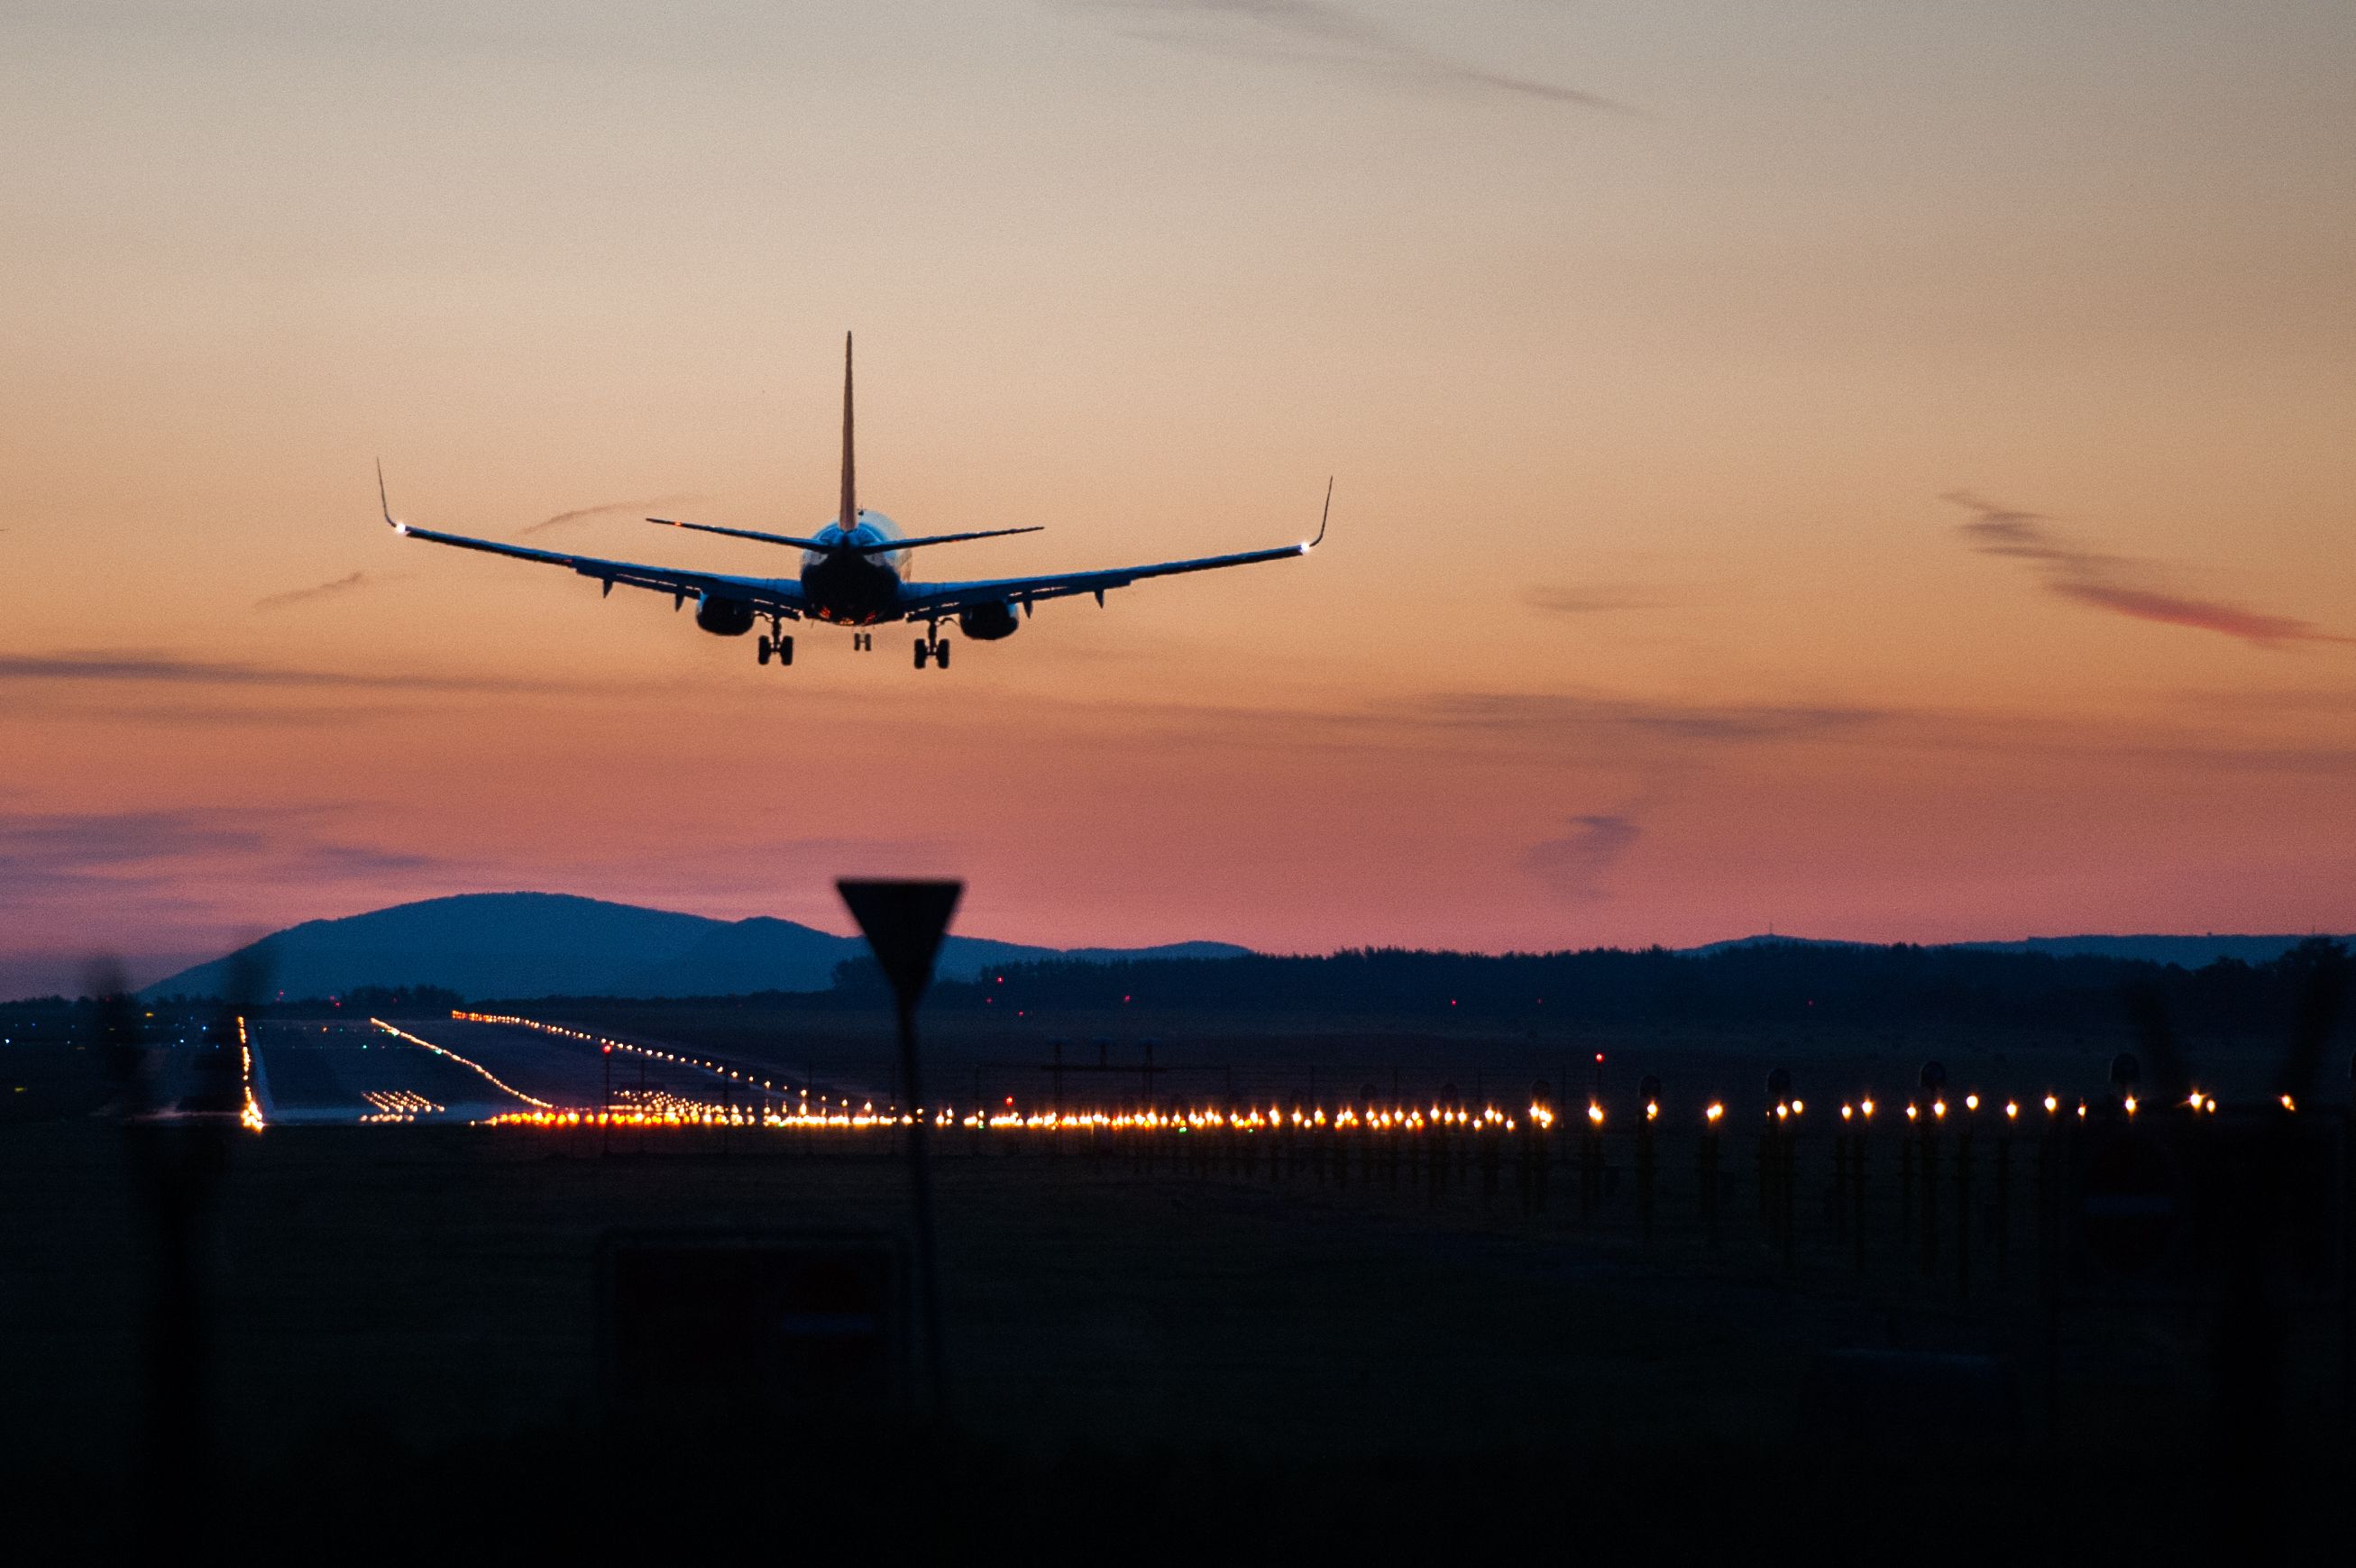 A Silhouette of a Boeing 737 Landing.